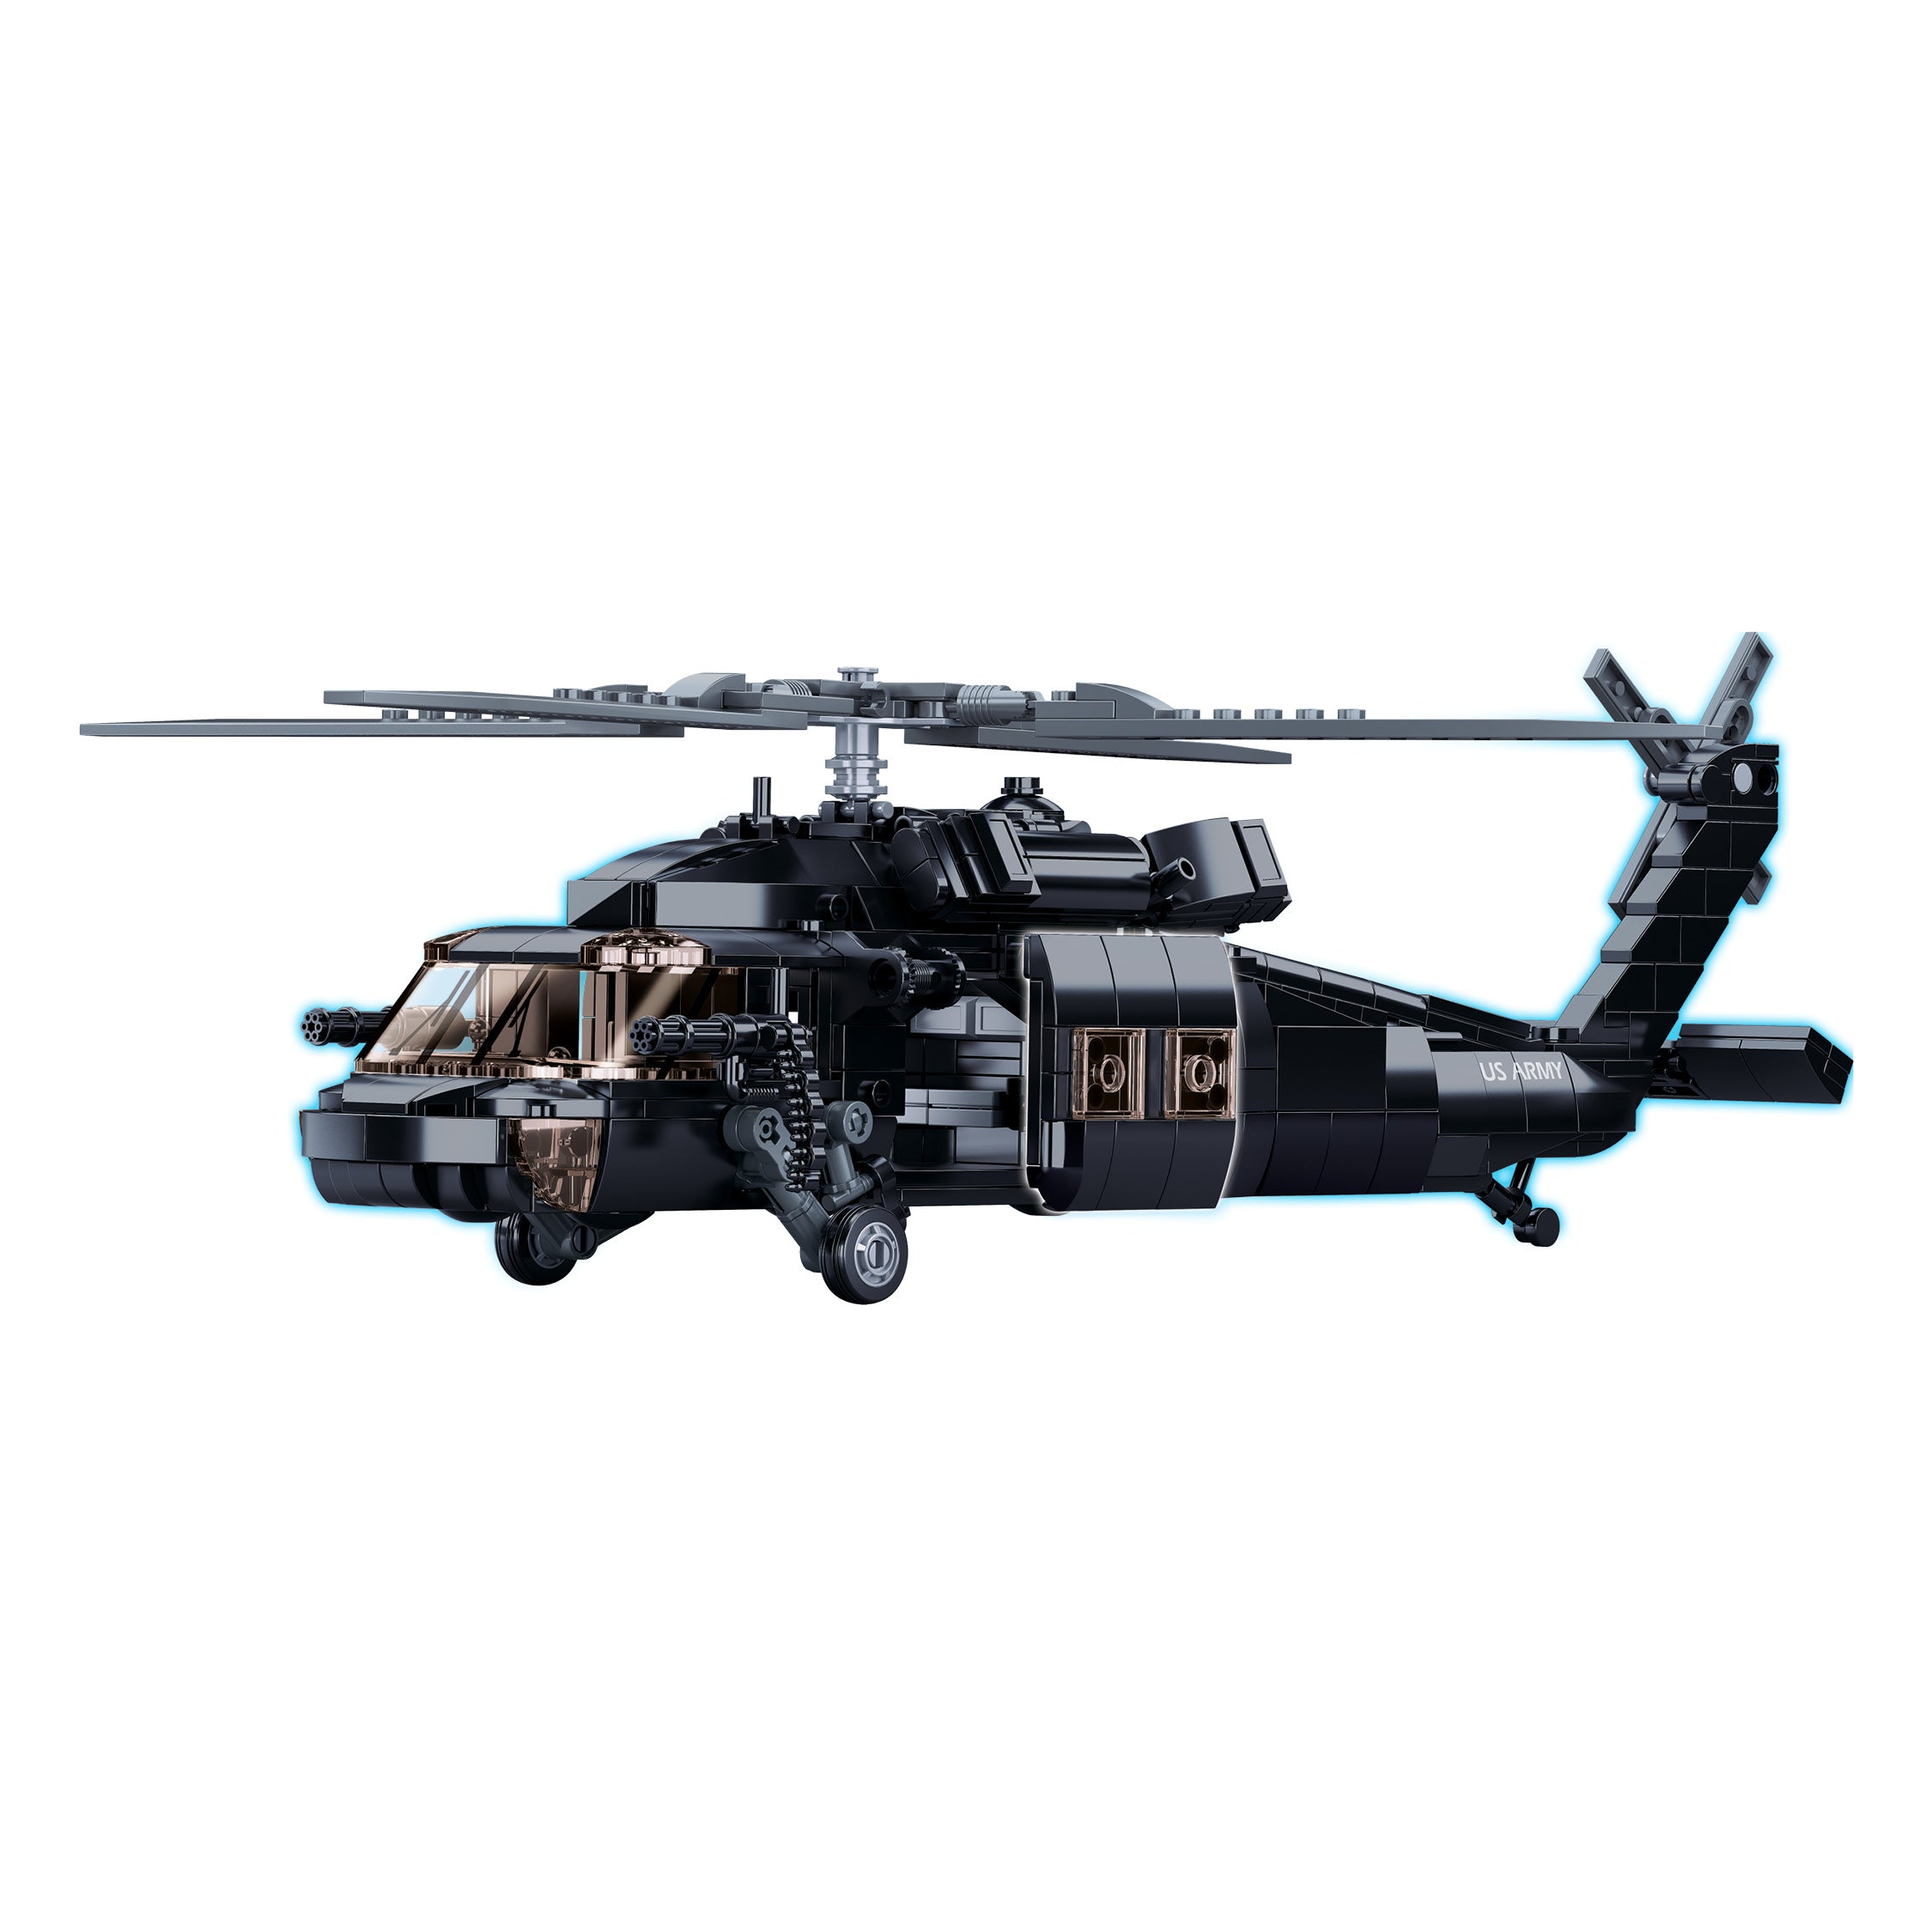 Sluban® Modelbricks Uh-60 Black Hawk (M38-B1012) (692 Pcs) Building Blocks Kit For Boys And Girls Aged 6 Years And Above Creative Construction Set Educational Stem Toy, Blocks Compatible With Other Leading Brands, Bis Certified.